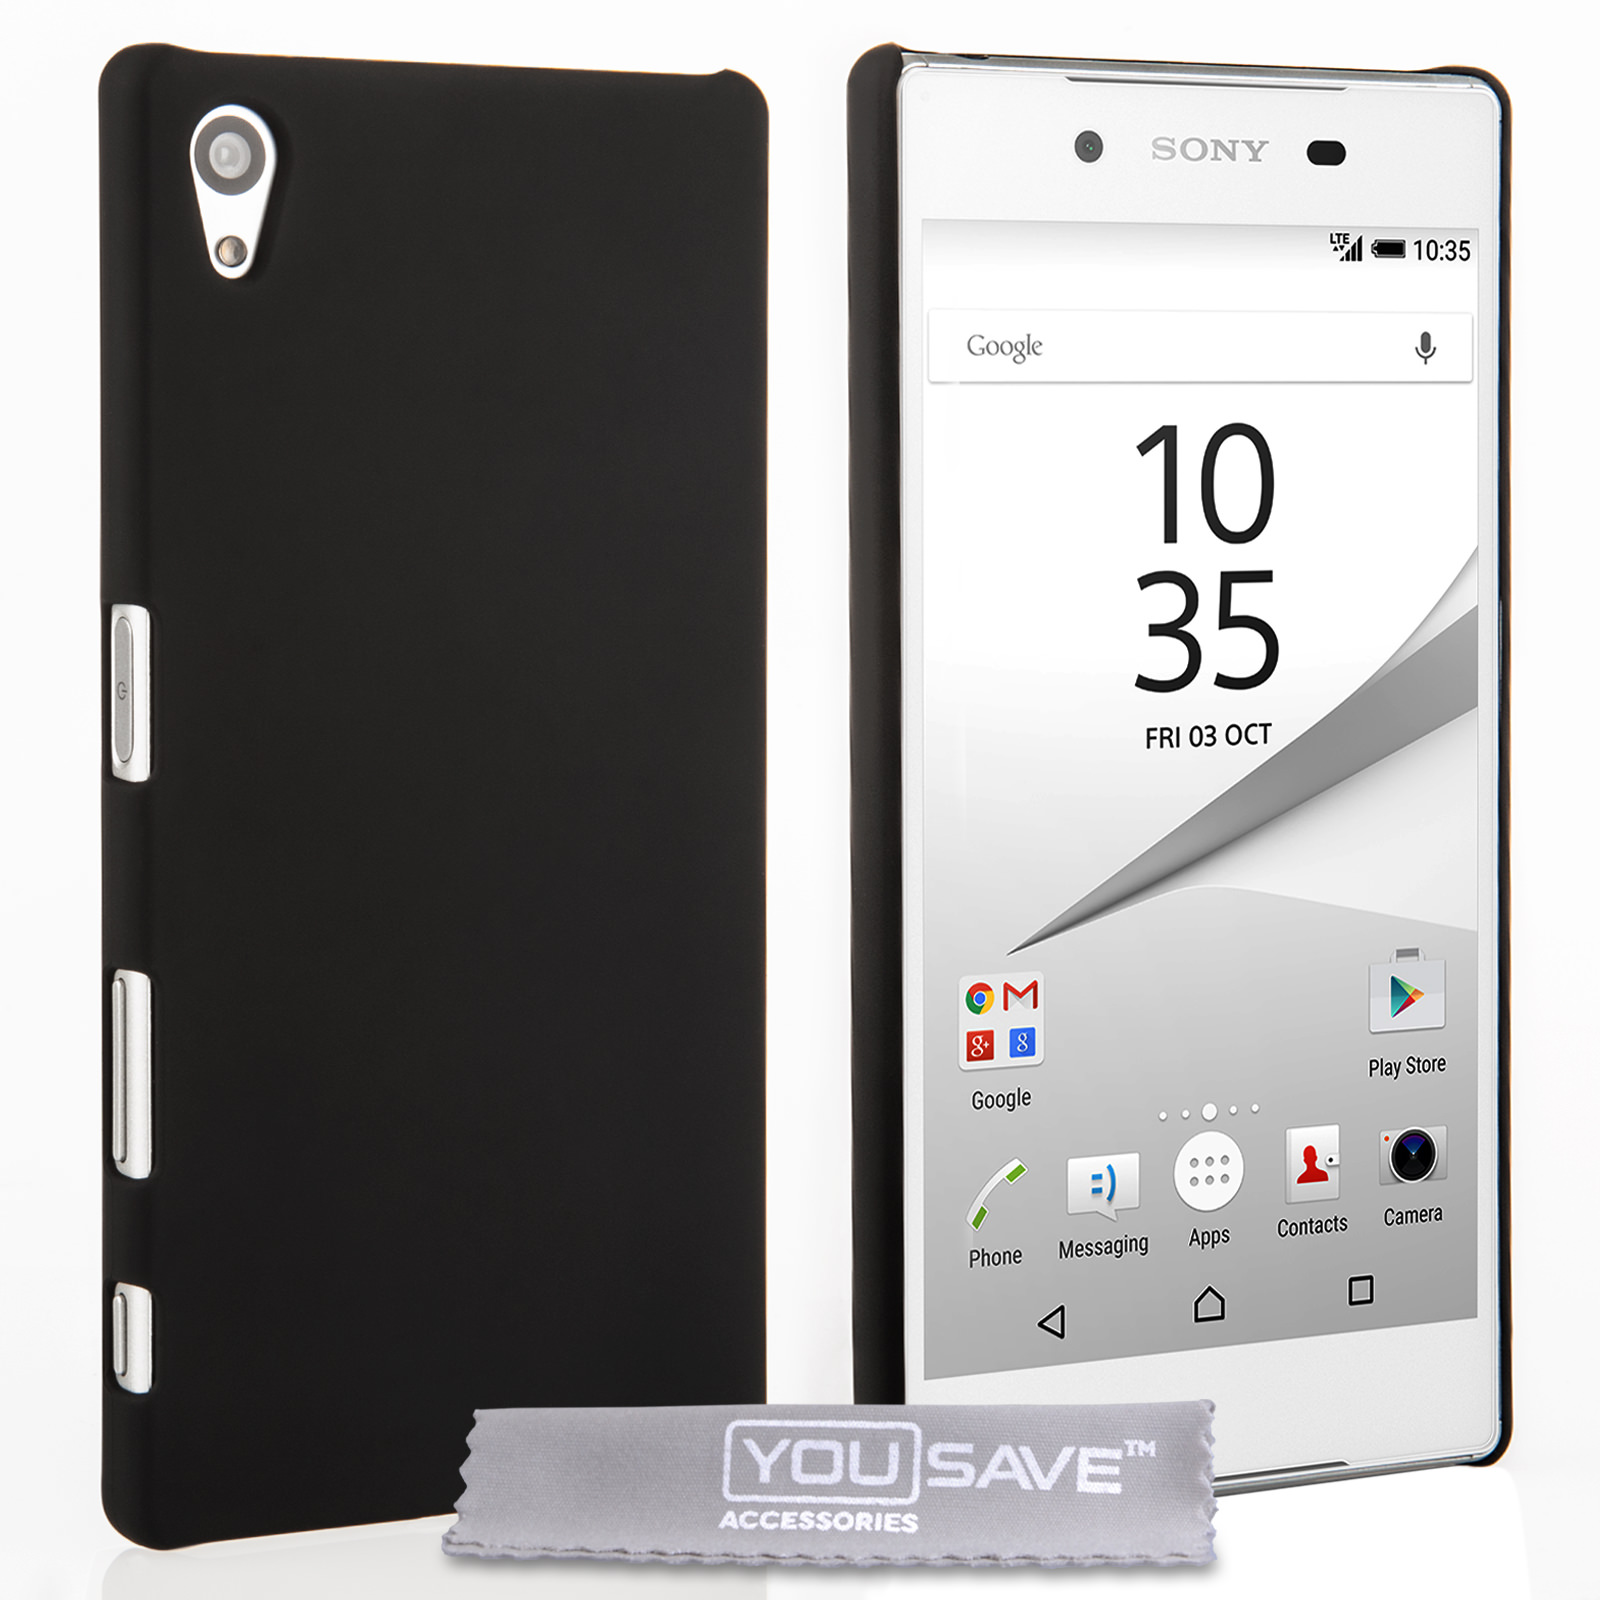 YouSave Accessories Sony Xperia Z5 Hard Hybrid Case - Black